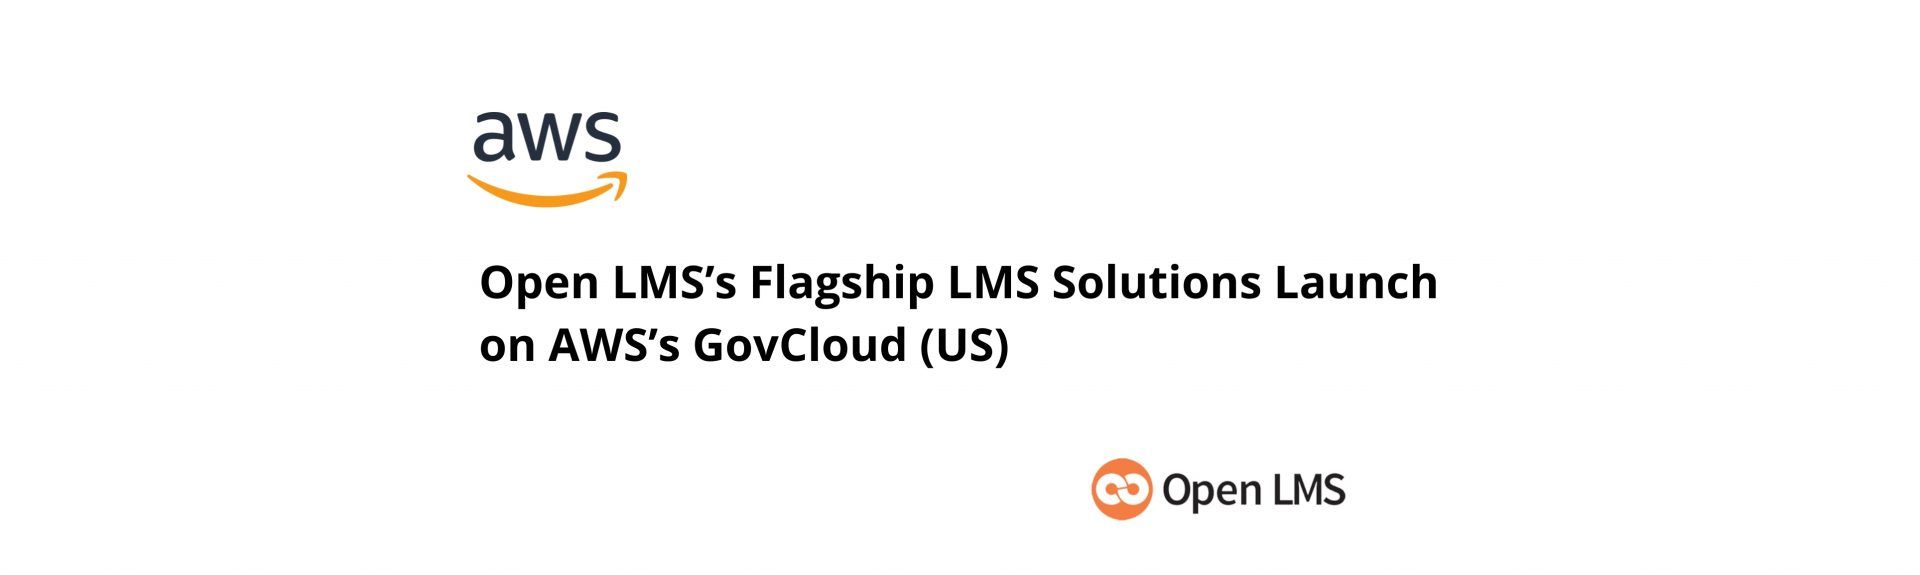 Open LMS’s Flagship LMS Solutions Launch on AWS’s GovCloud (US)